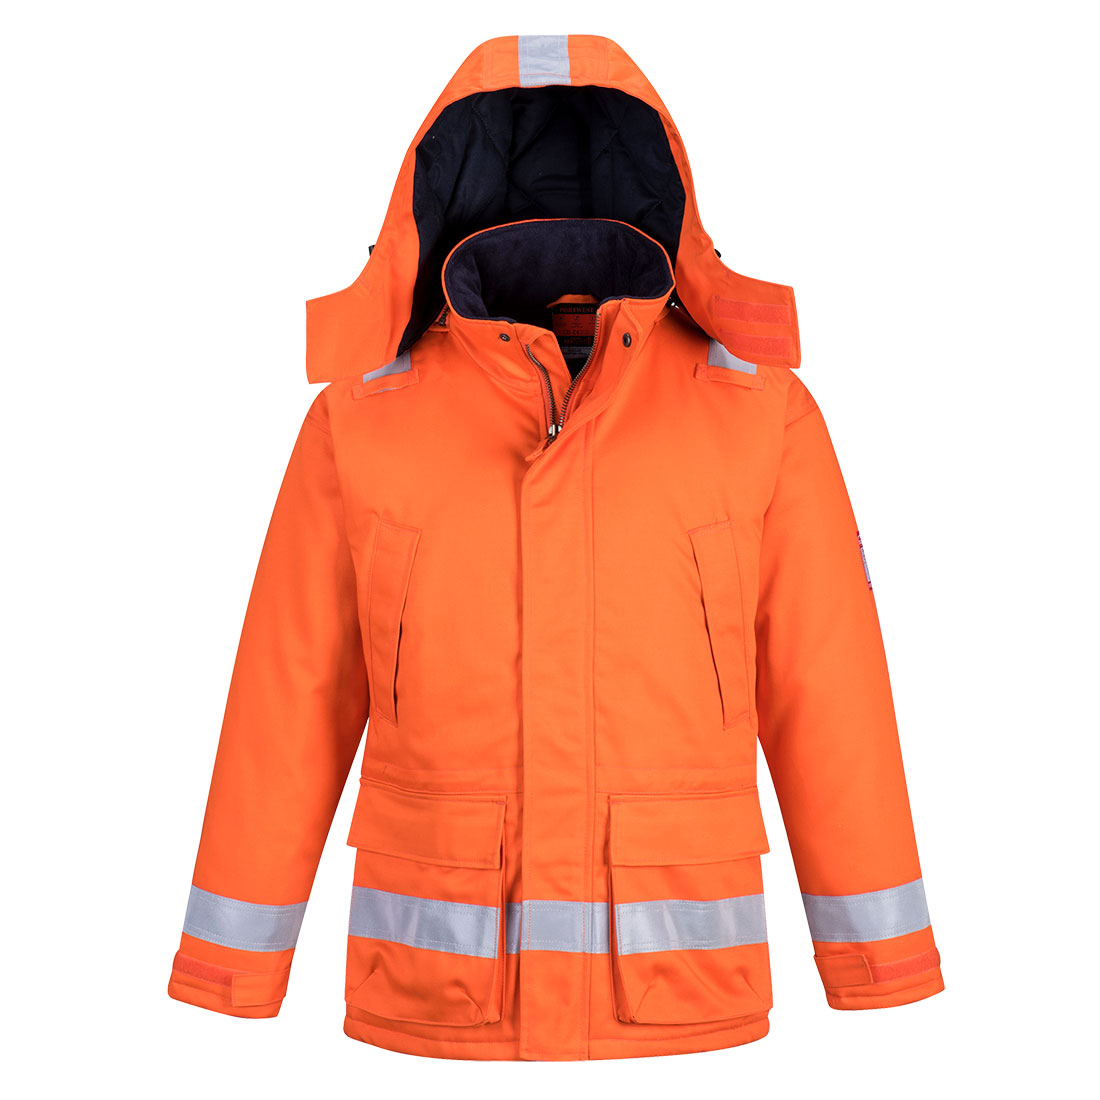 Flame Resistant Insulated Waterproof Winter Warming Jacket